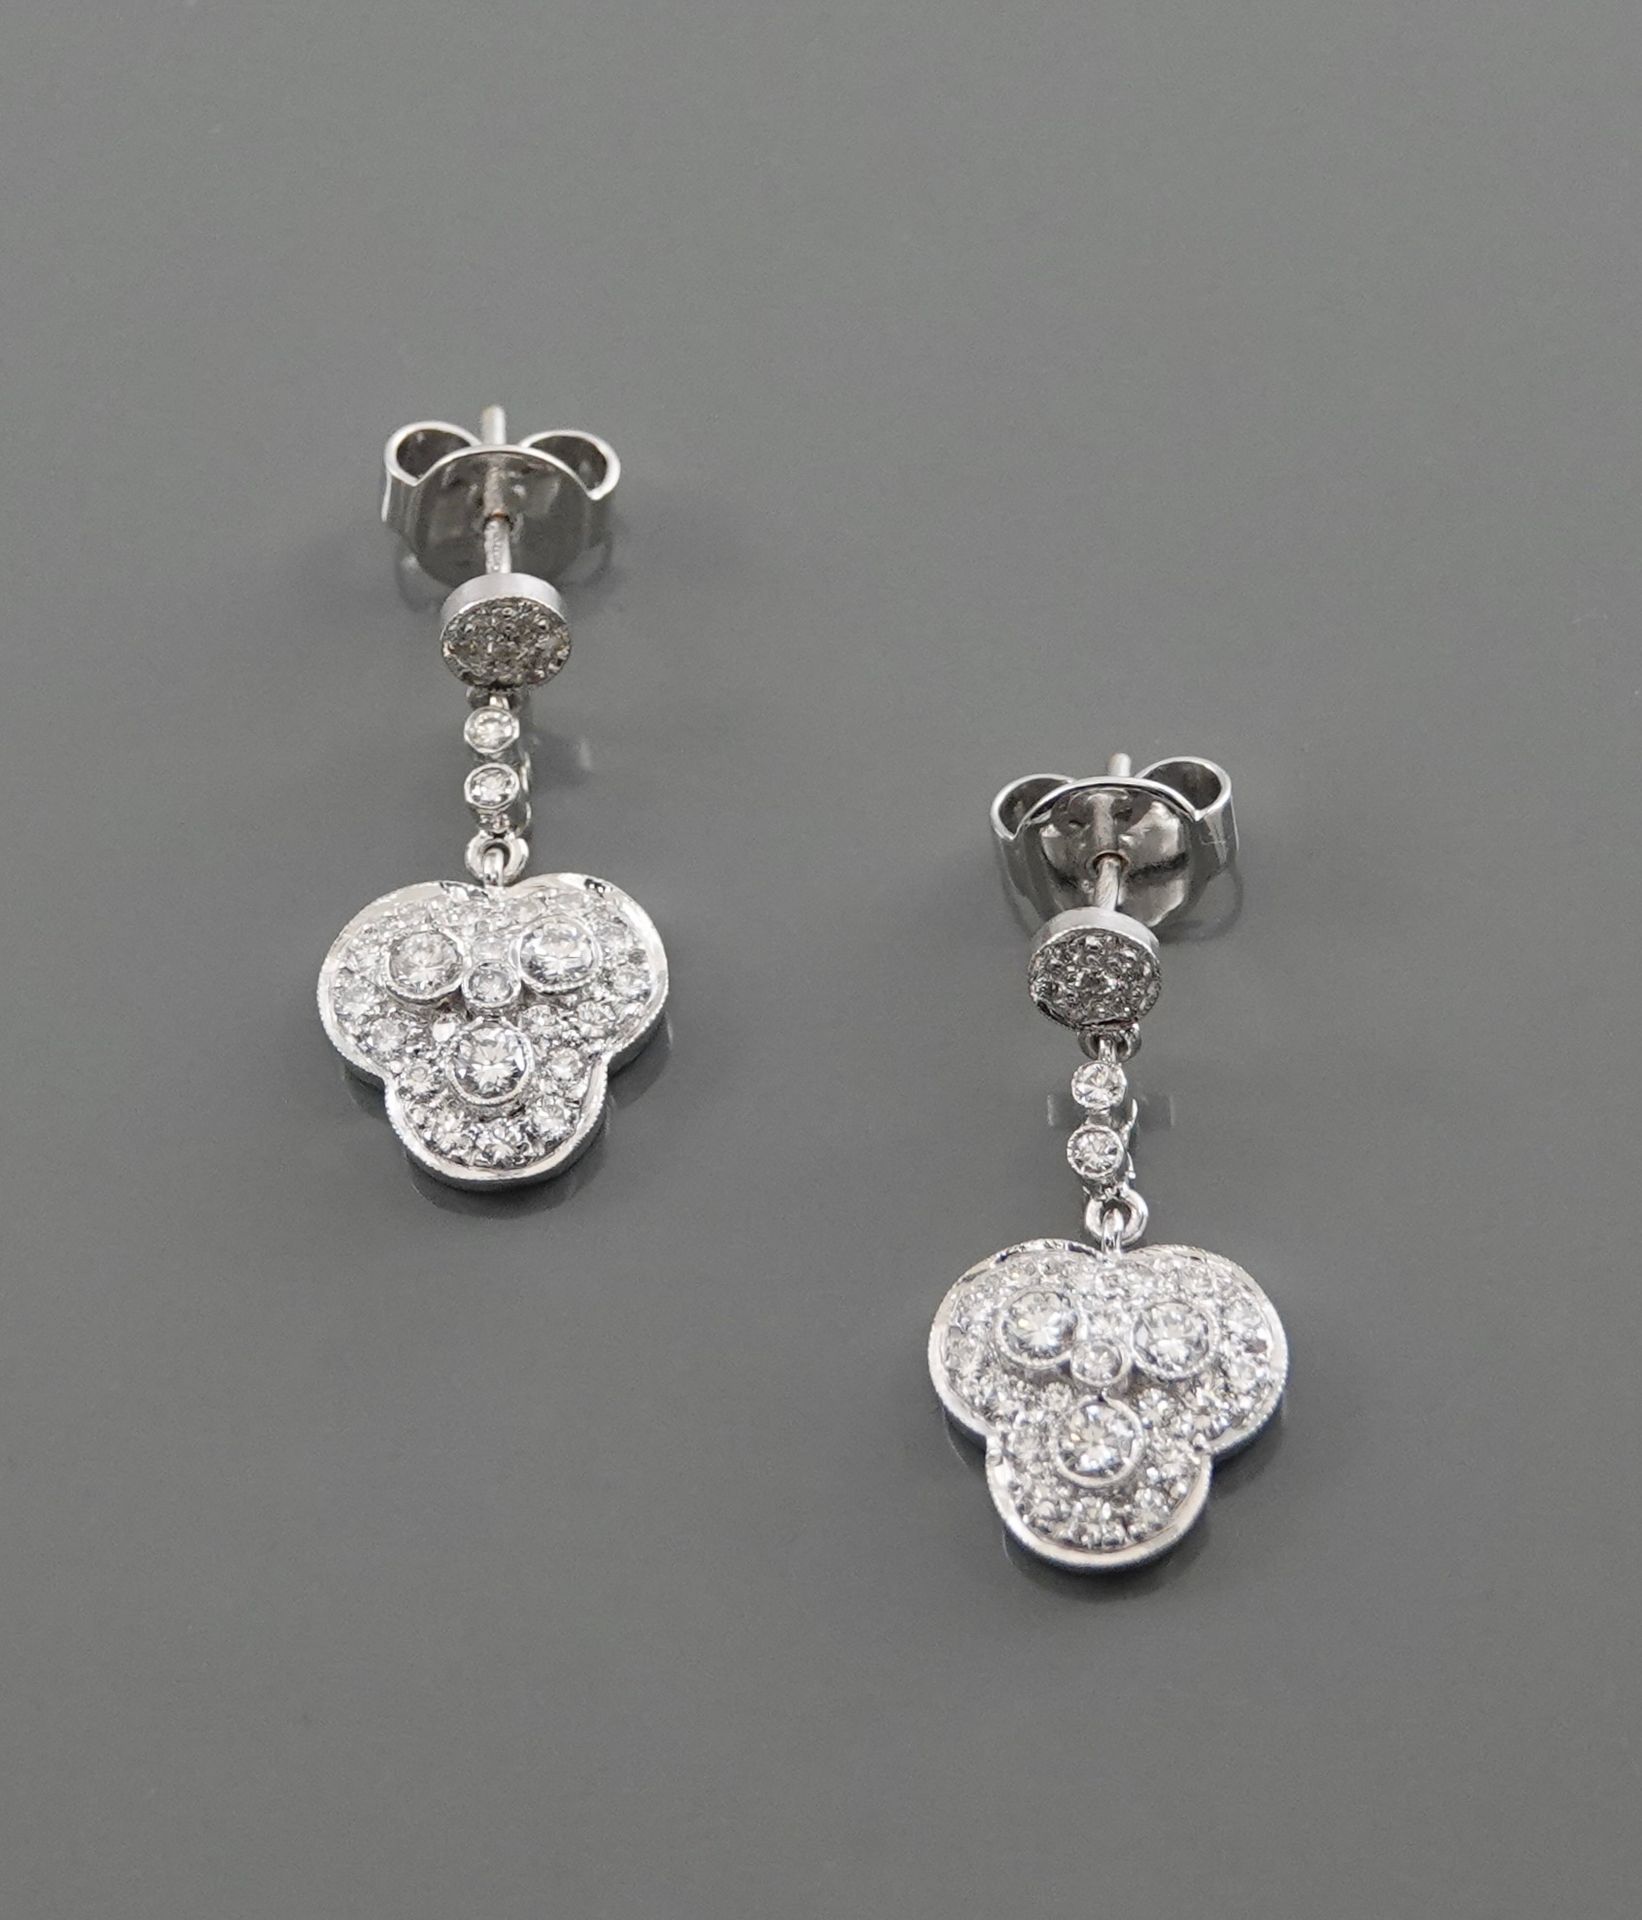 Null Earrings in white gold, 750 MM, each adorned with diamonds holding a diamon&hellip;